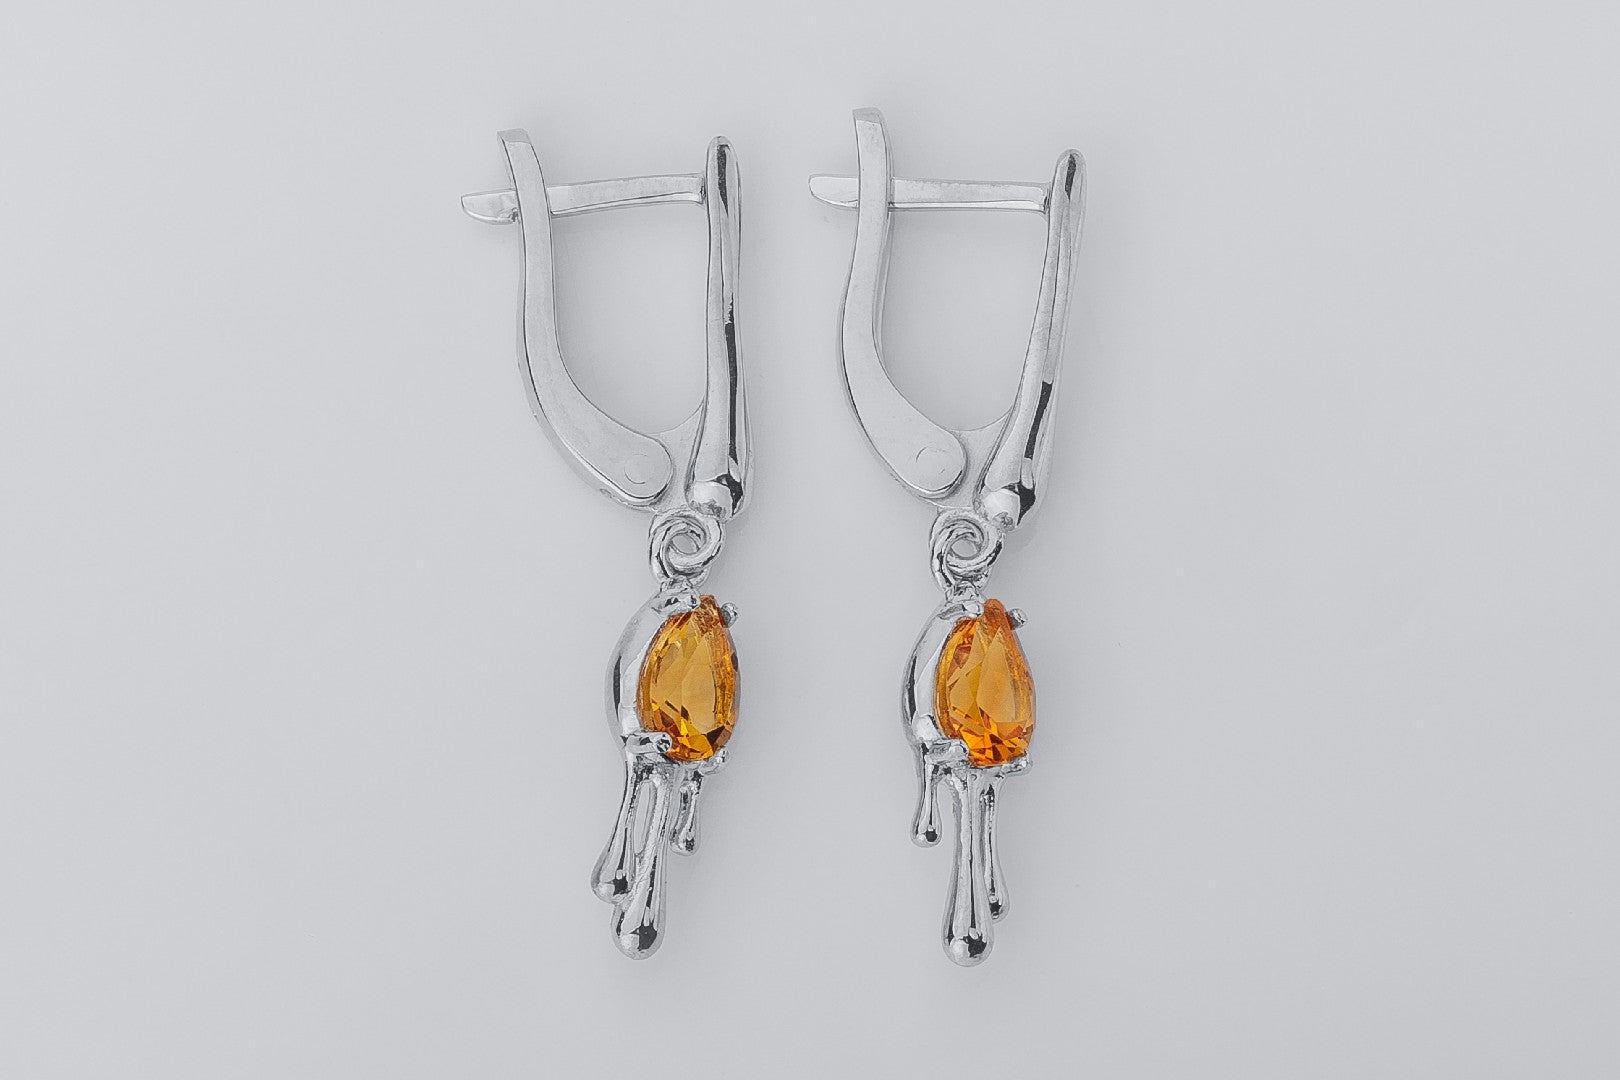 Candle Light Earrings with Citrine, Rhodium plated 925 silver